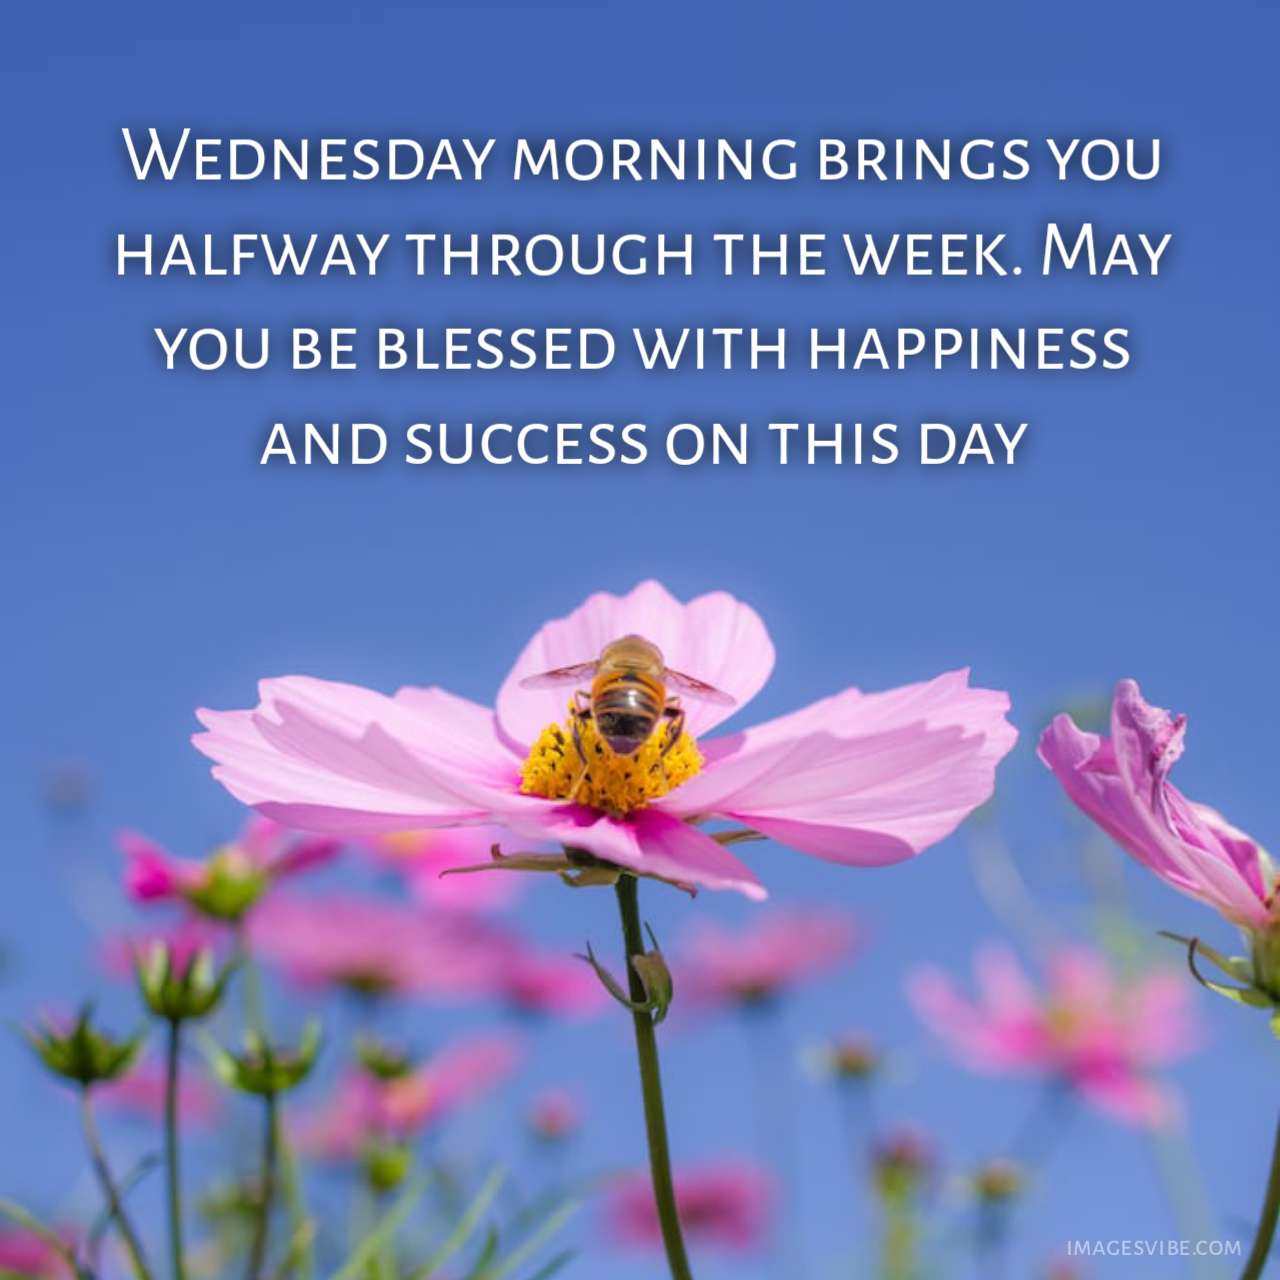 Best 30+ Wednesday Blessings Images & Quotes In 2023 - Images Vibe